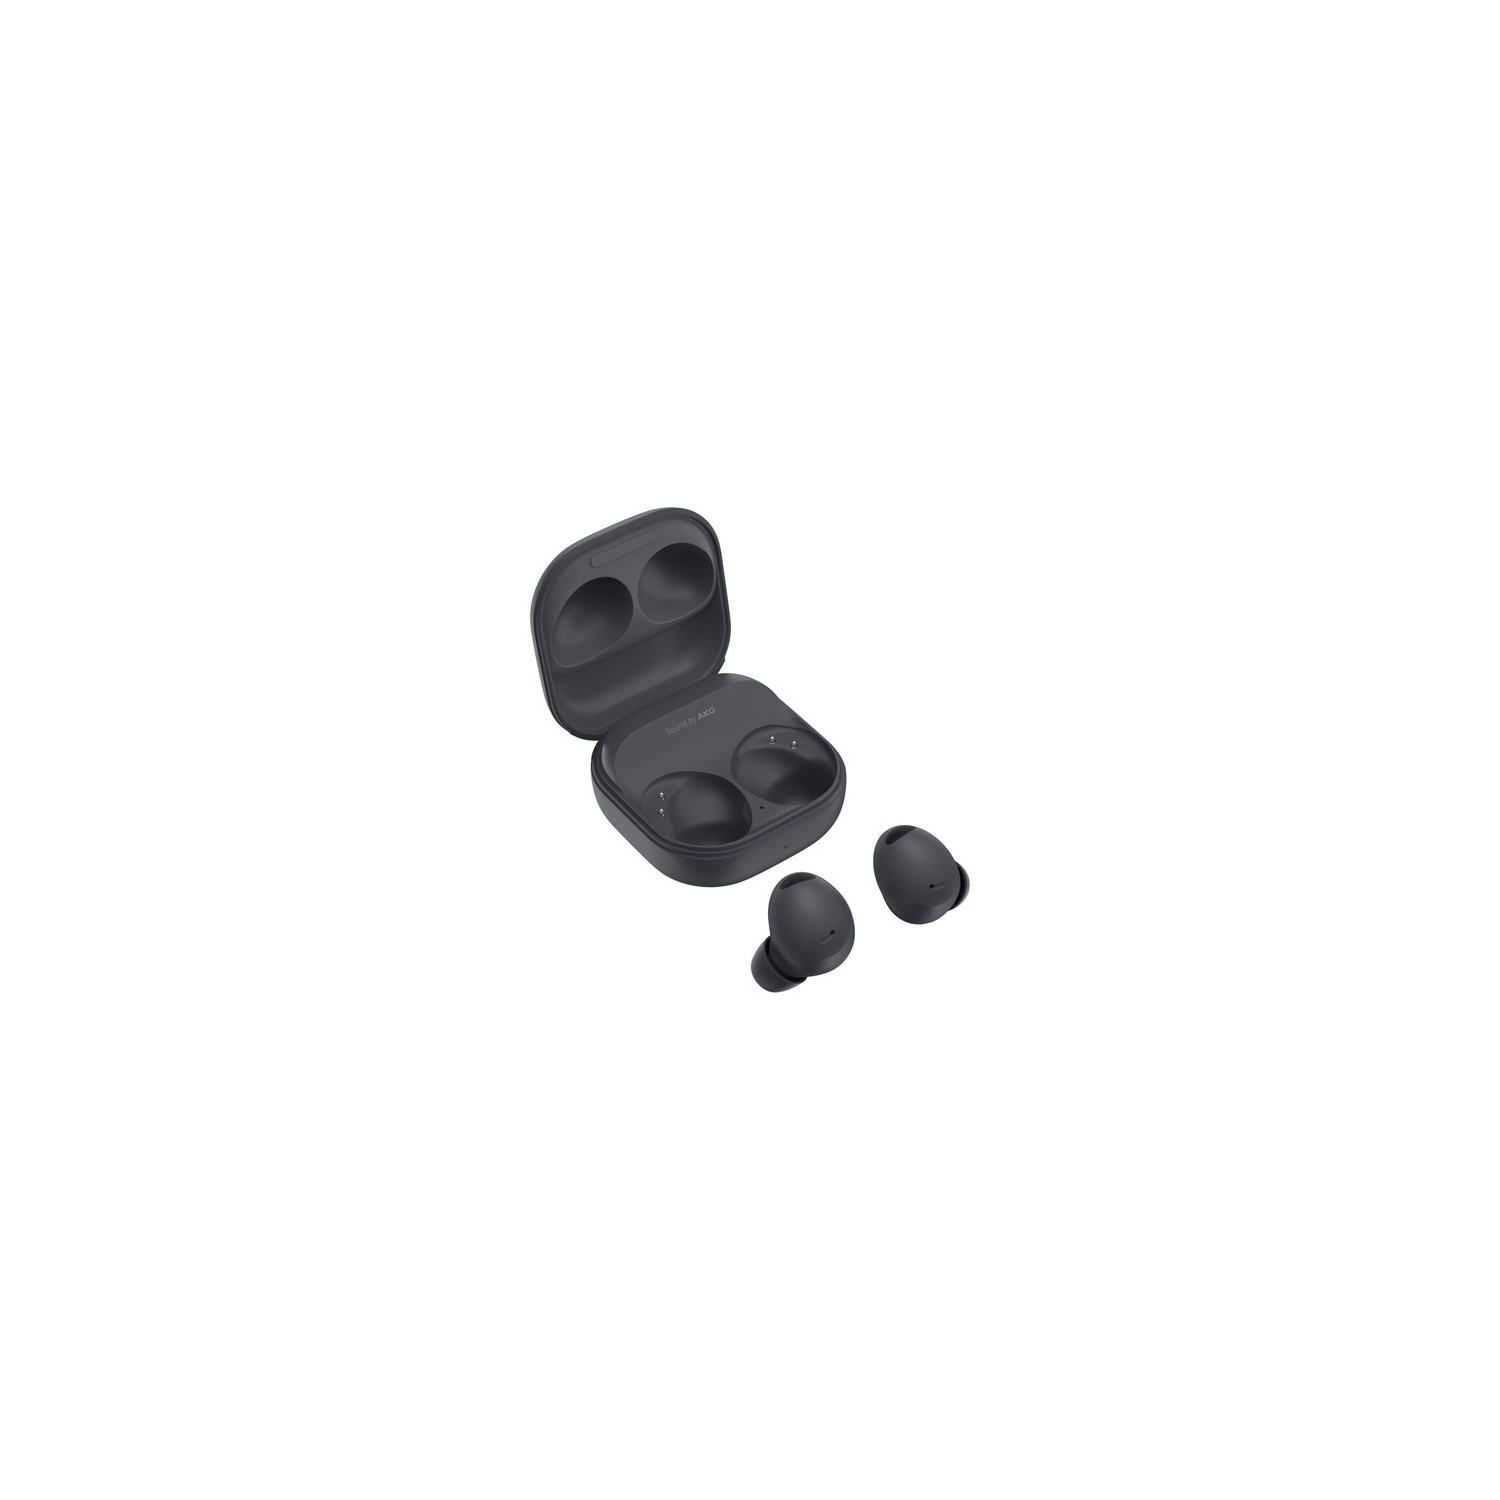 Refurbished (Excellent) - Samsung Galaxy Buds2 Pro In-Ear Noise Cancelling True Wireless Earbuds - Graphite